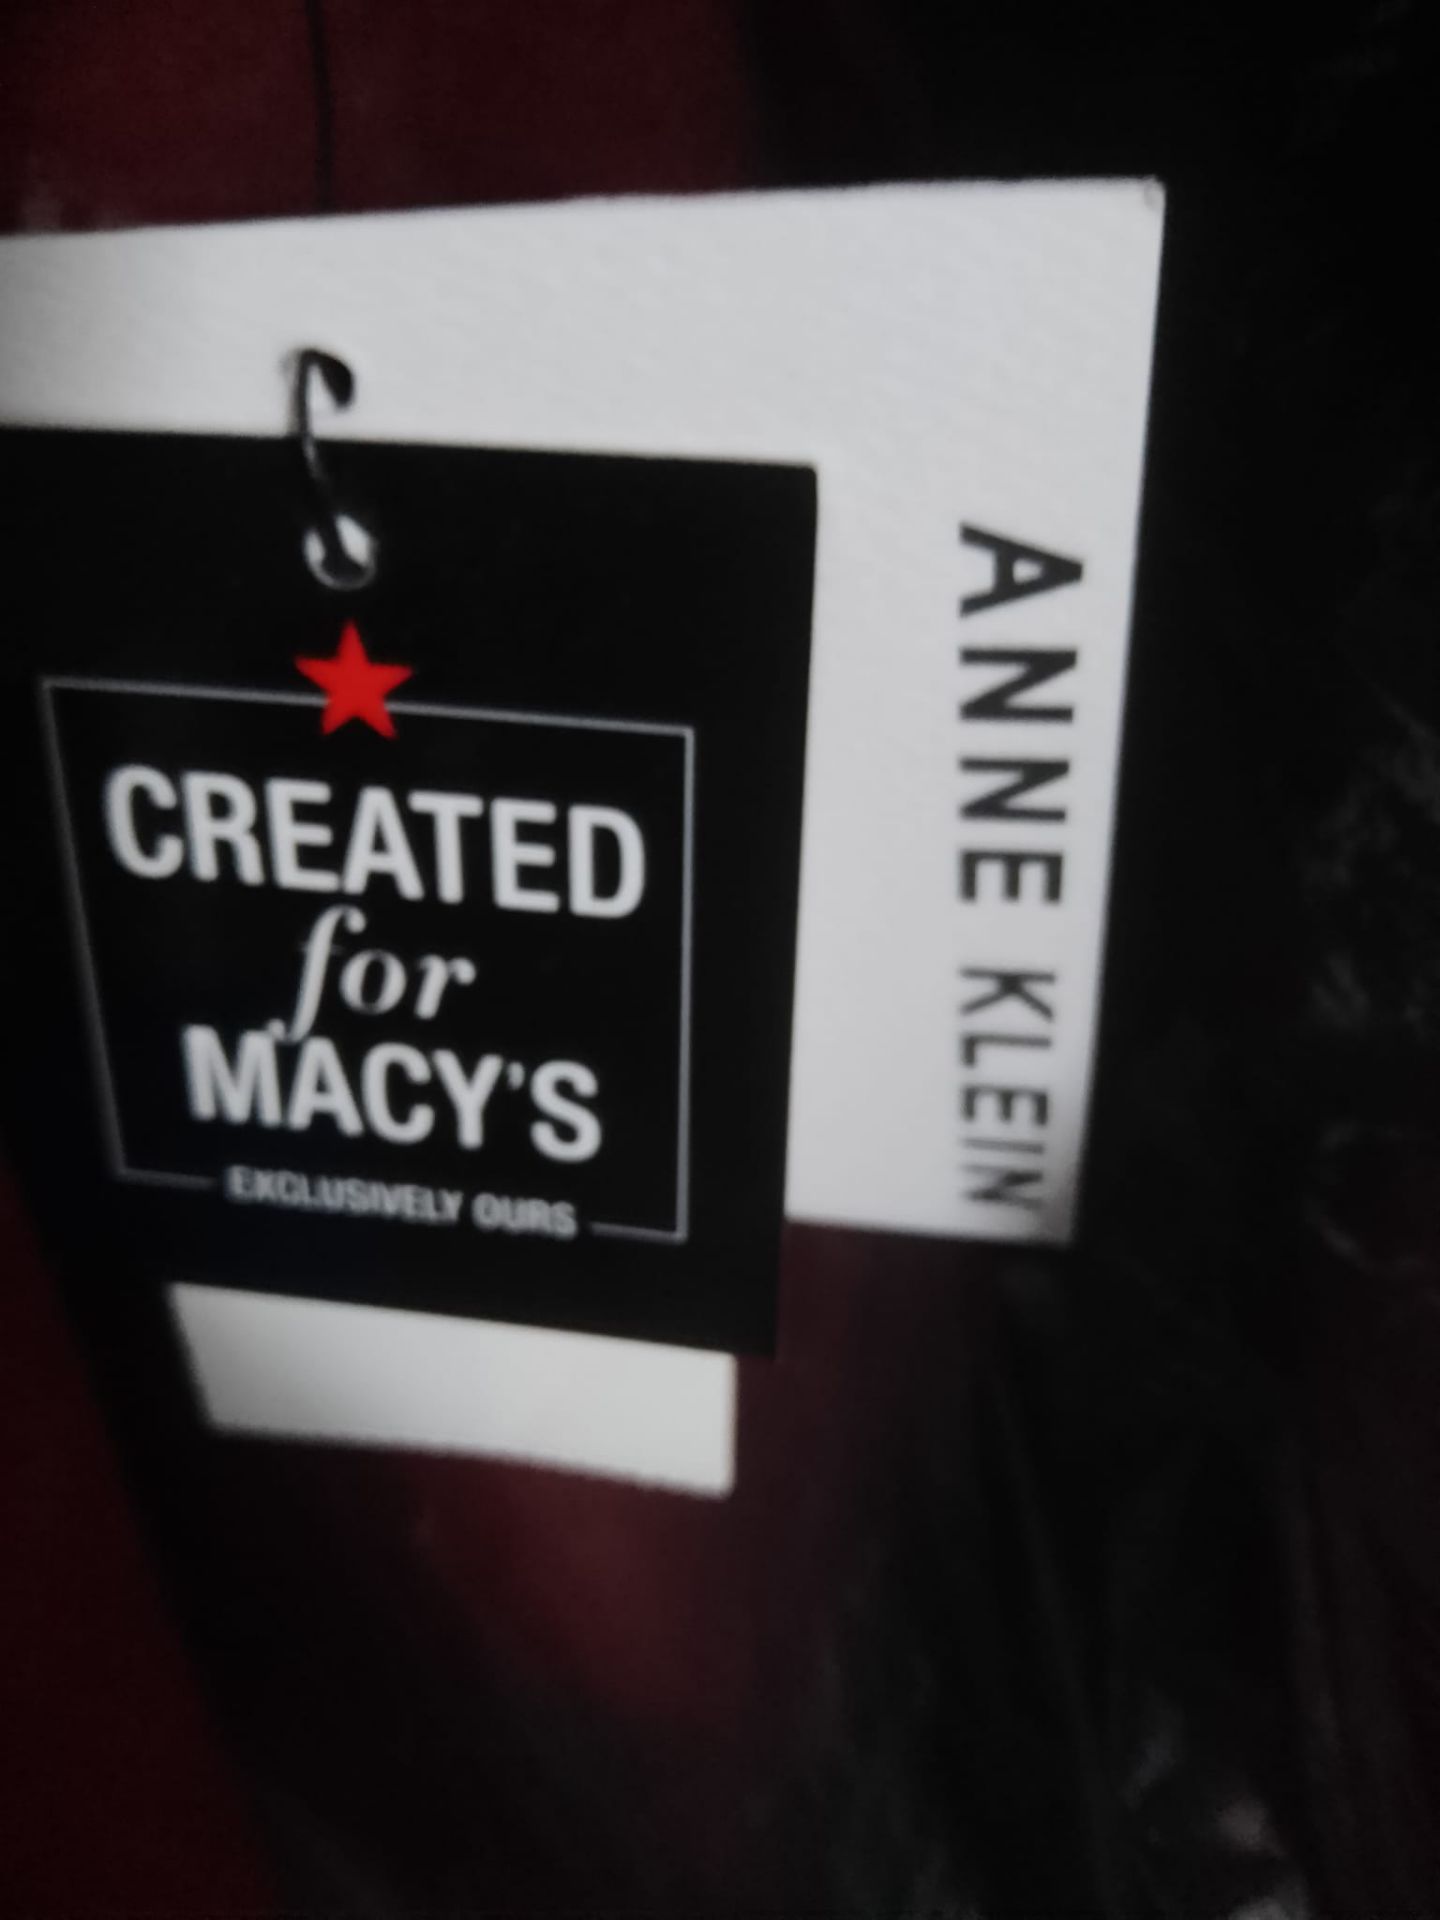 5 NEW LADIES DESIGNER COATS, 4 ANNA KLEIN, 1 INTERNATIONAL CONCEPTS BY MACYS AMERICAN IMPORTS - Image 3 of 6